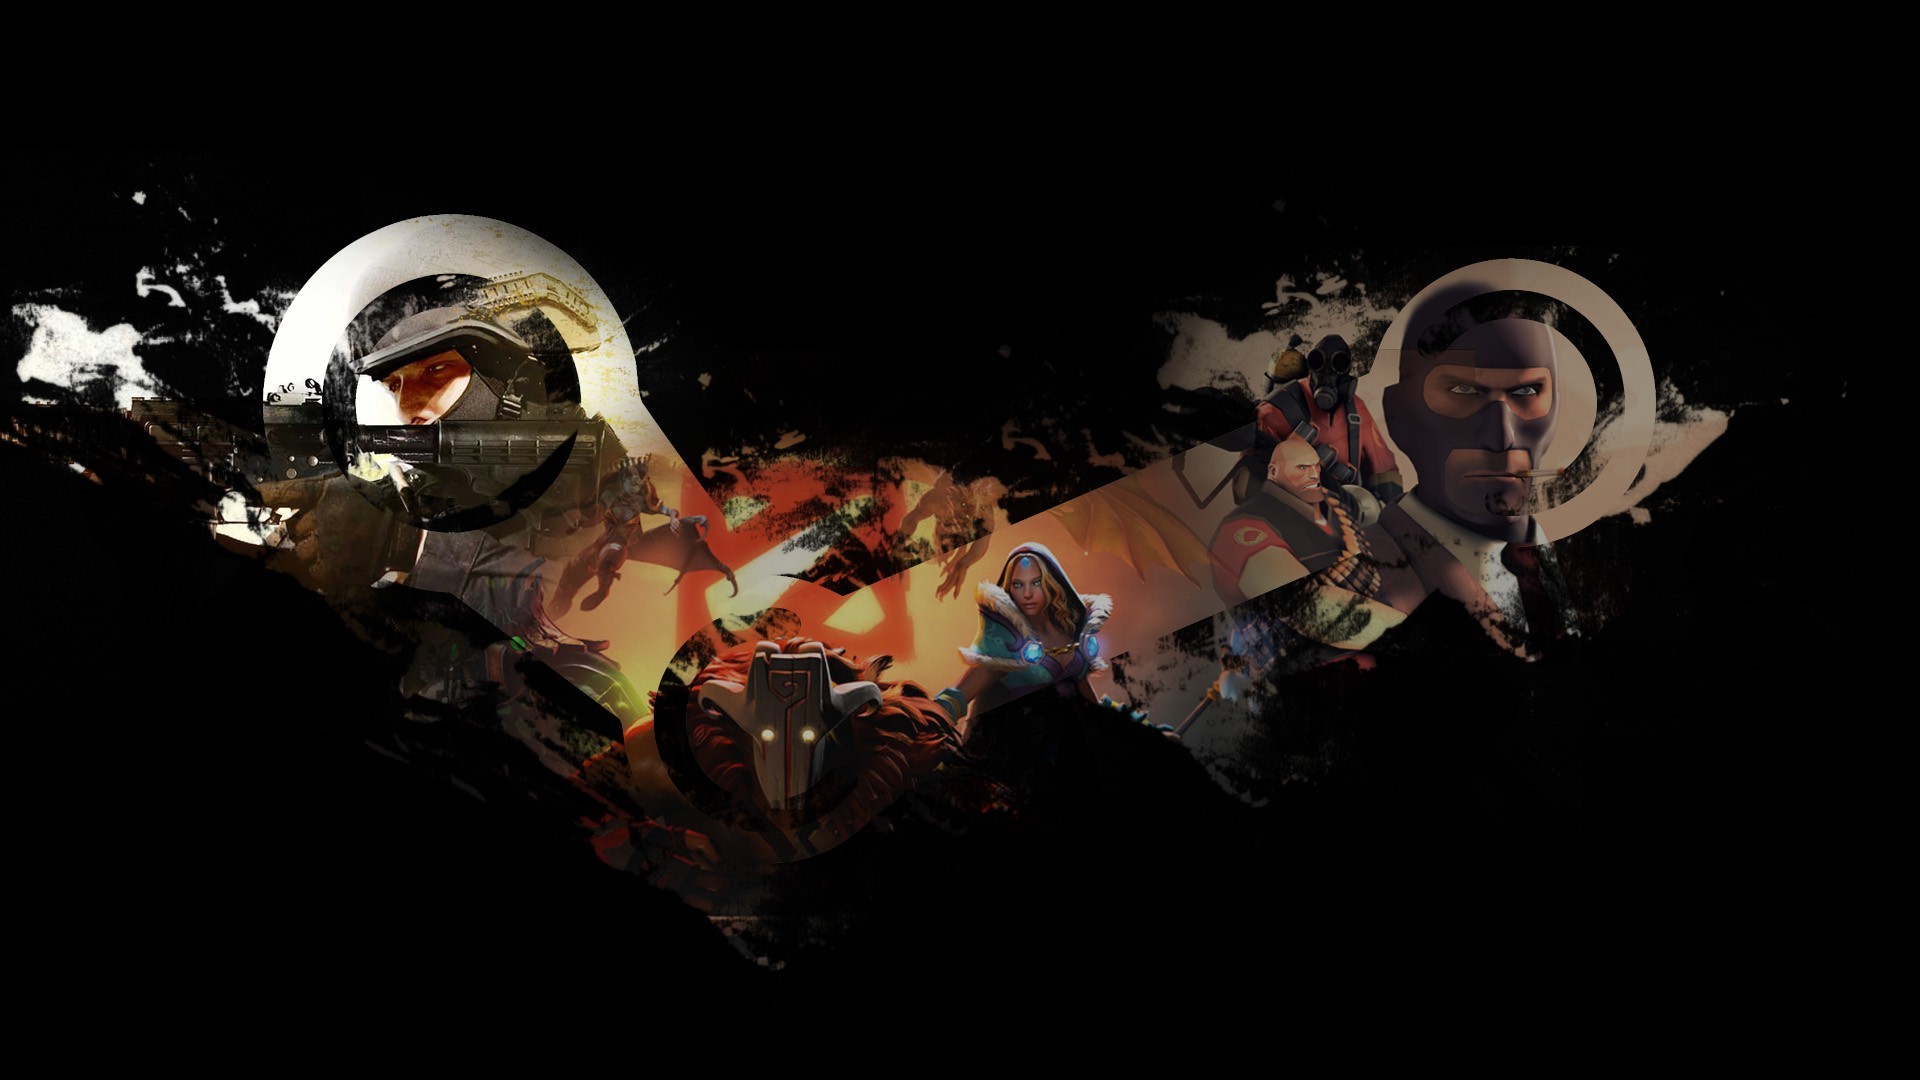 Counter Strike Global Offensive HD Wallpaper And Background